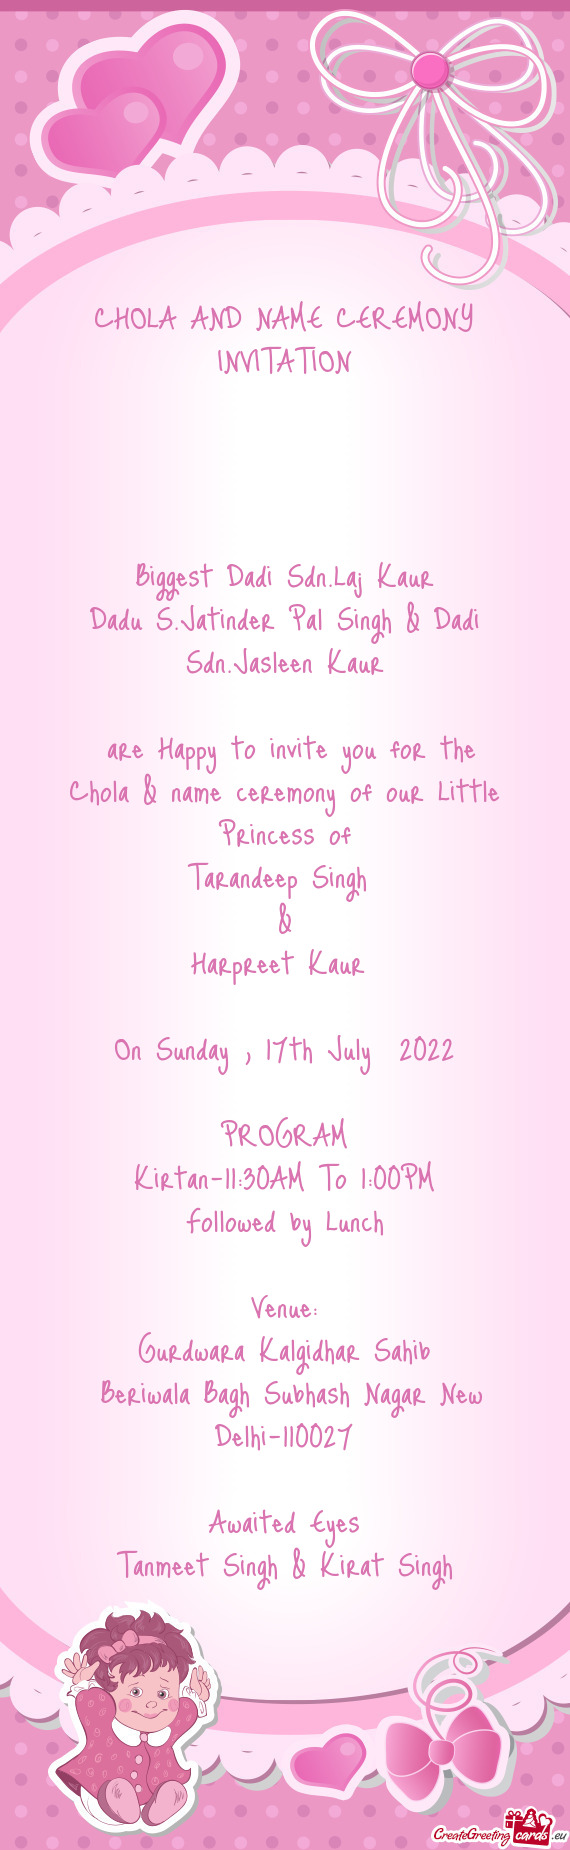 Chola & name ceremony of our Little Princess of